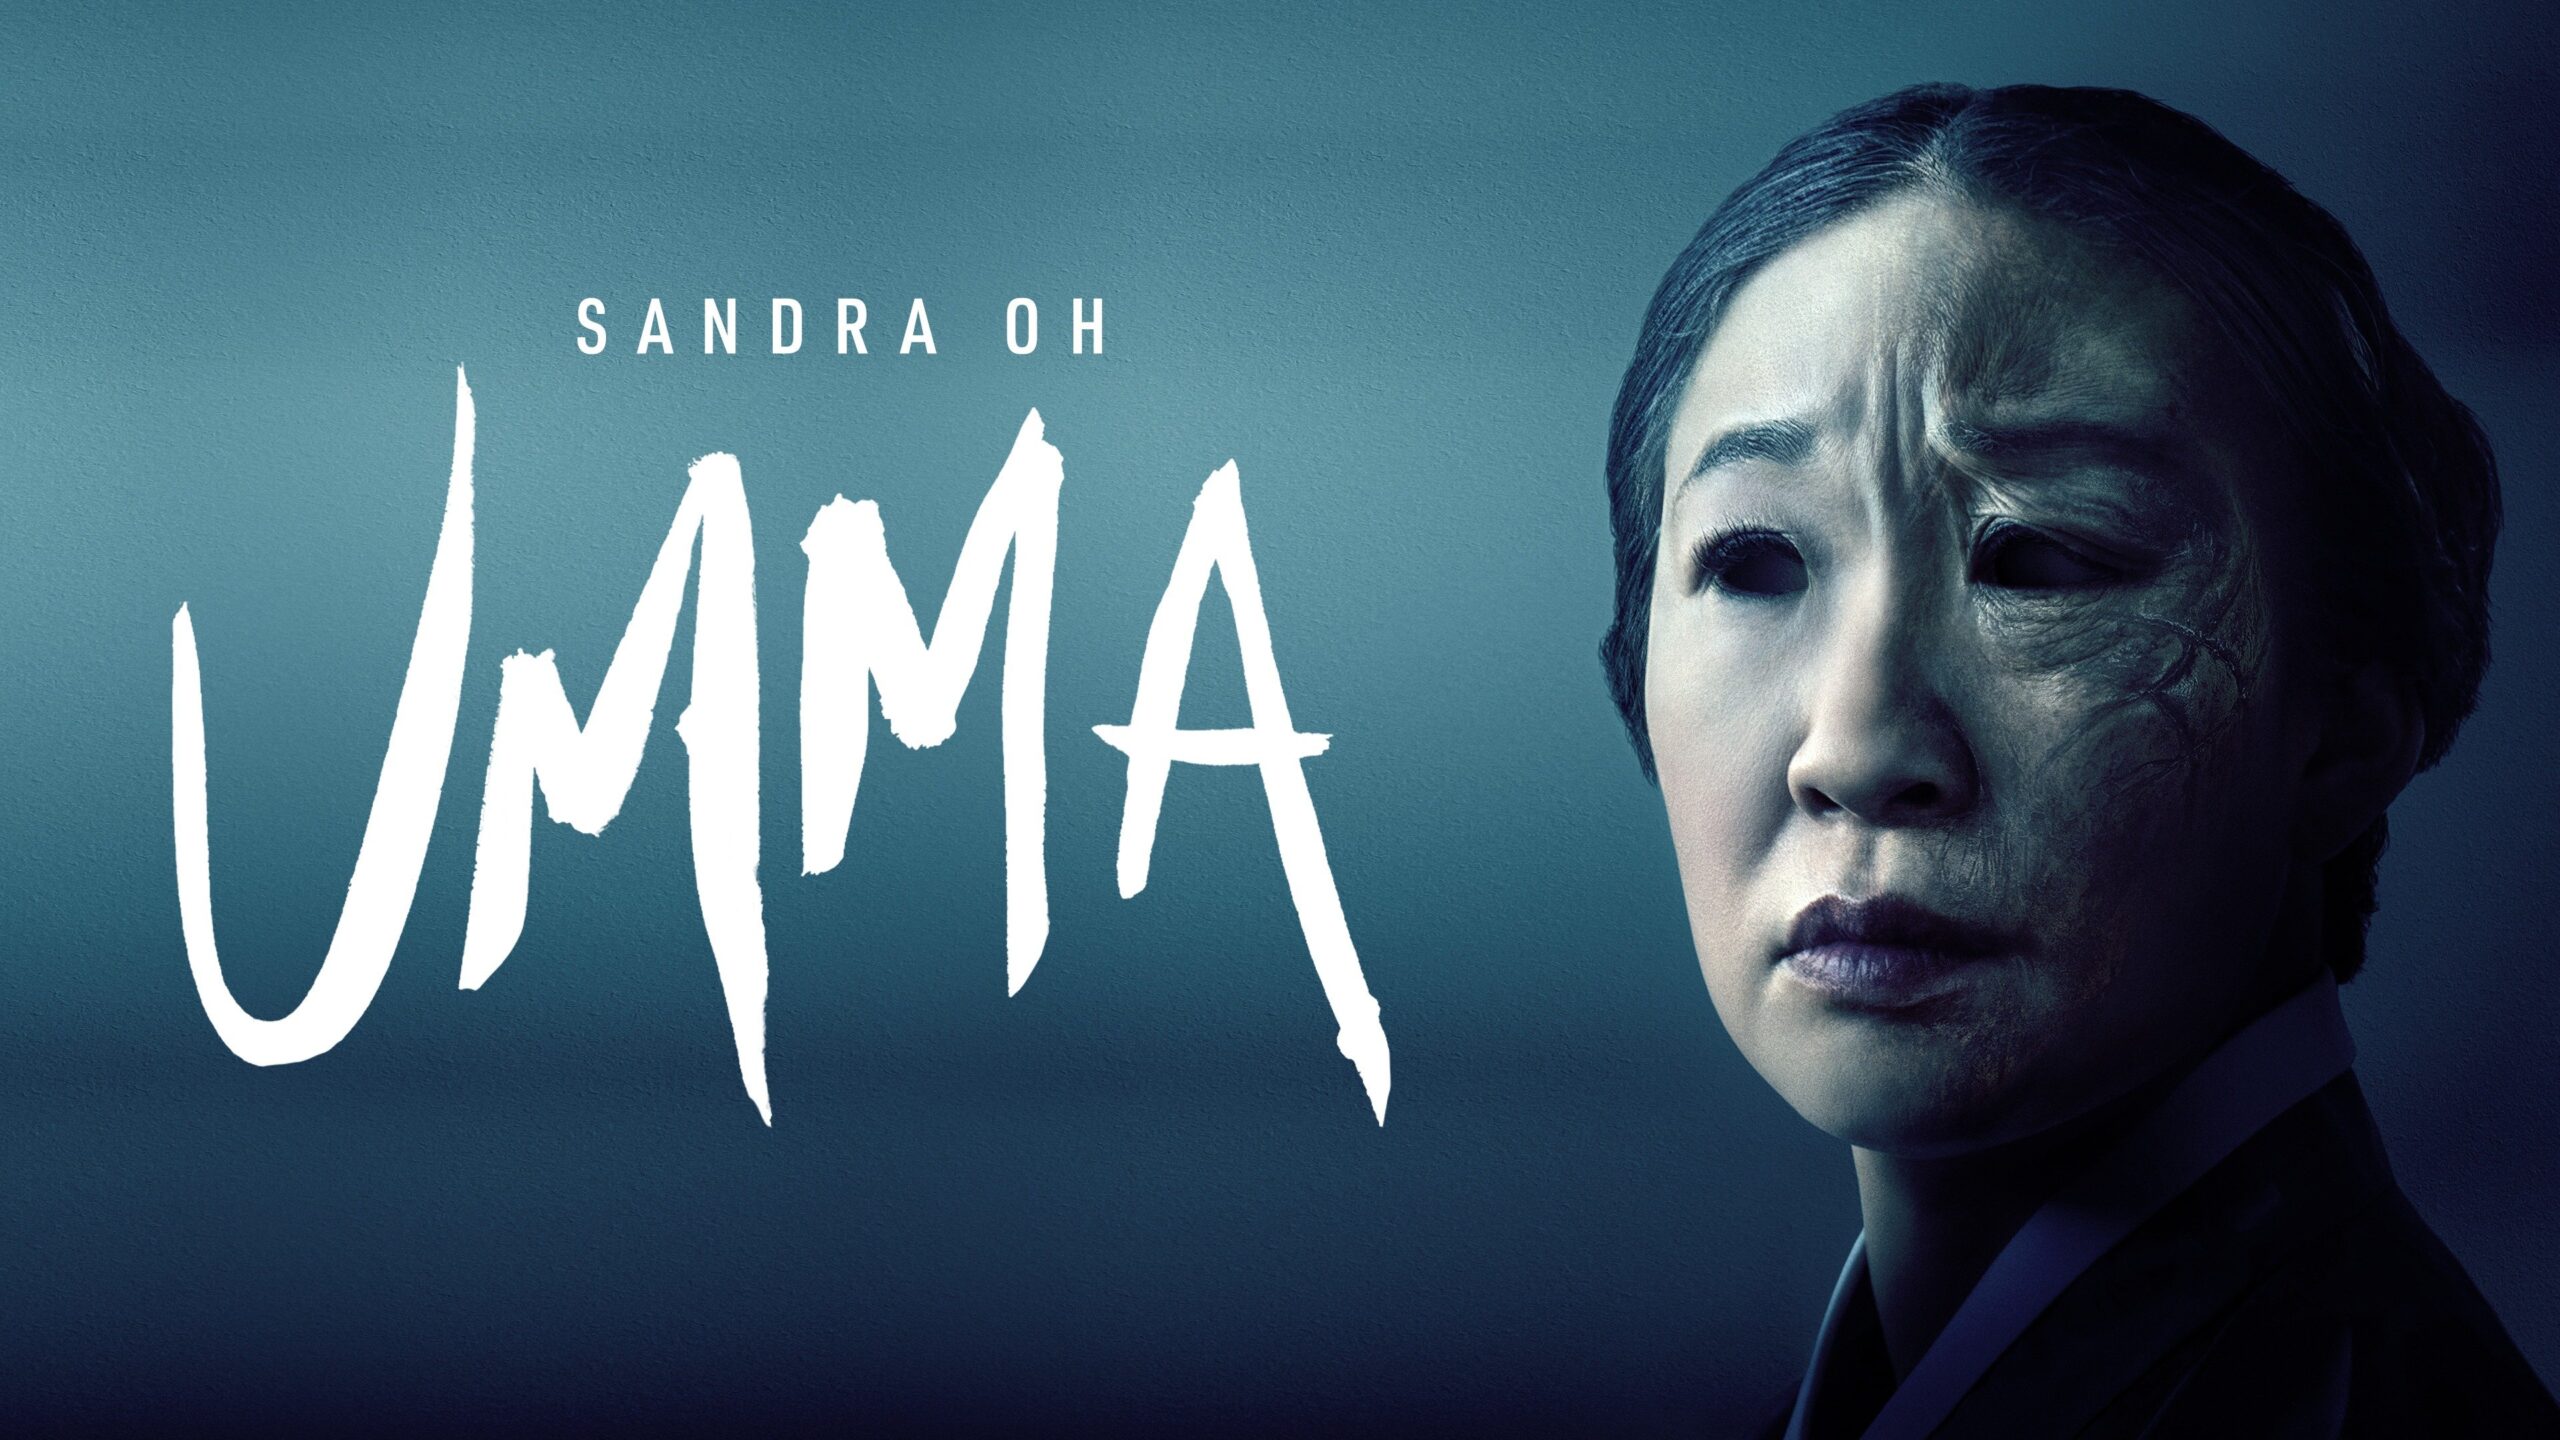 Sandra Oh staring to the side, her face covered in shadow from the left. Umma written in large font to the right.